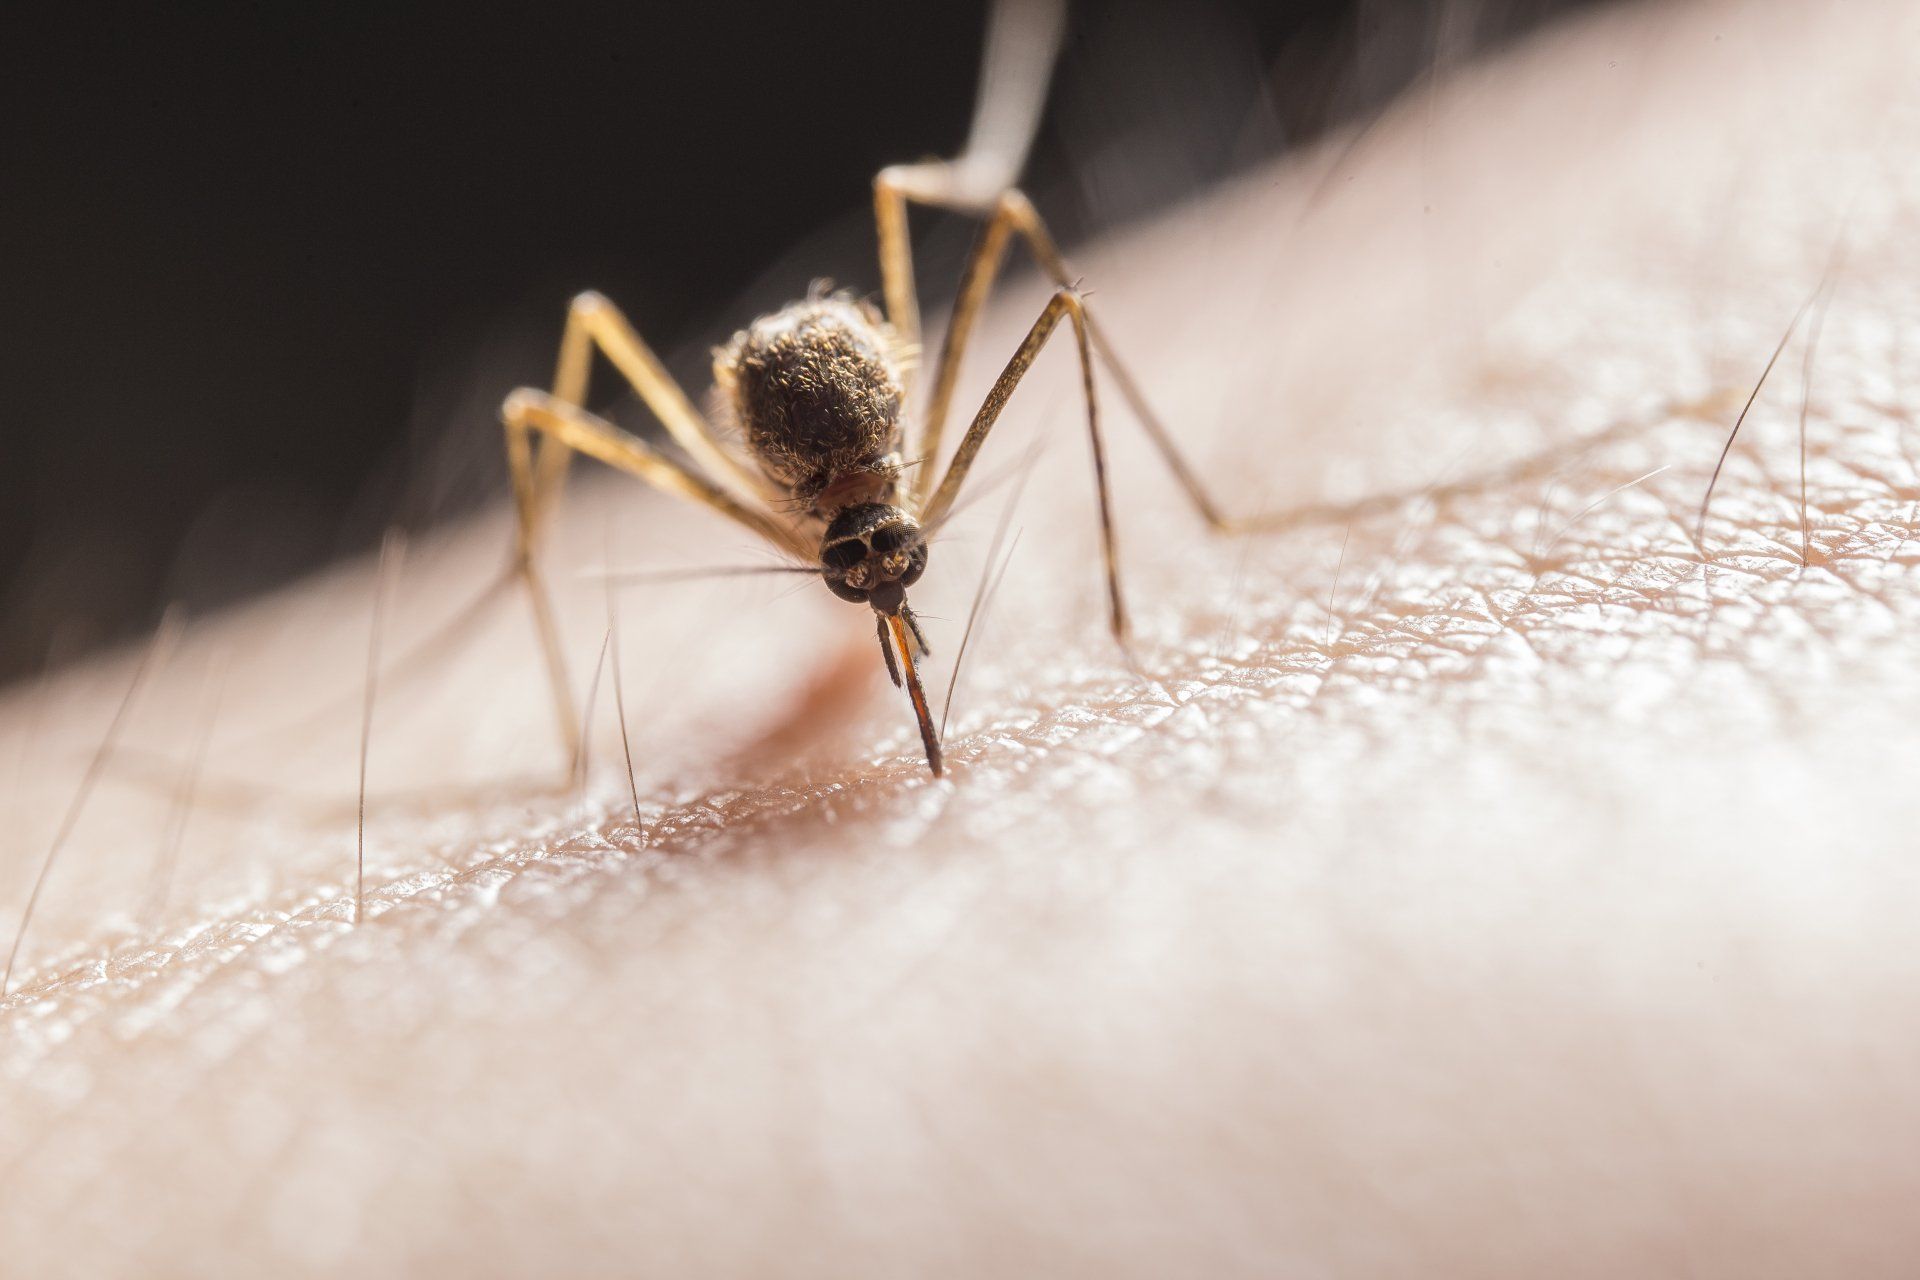 Close up of a mosquito on human skin